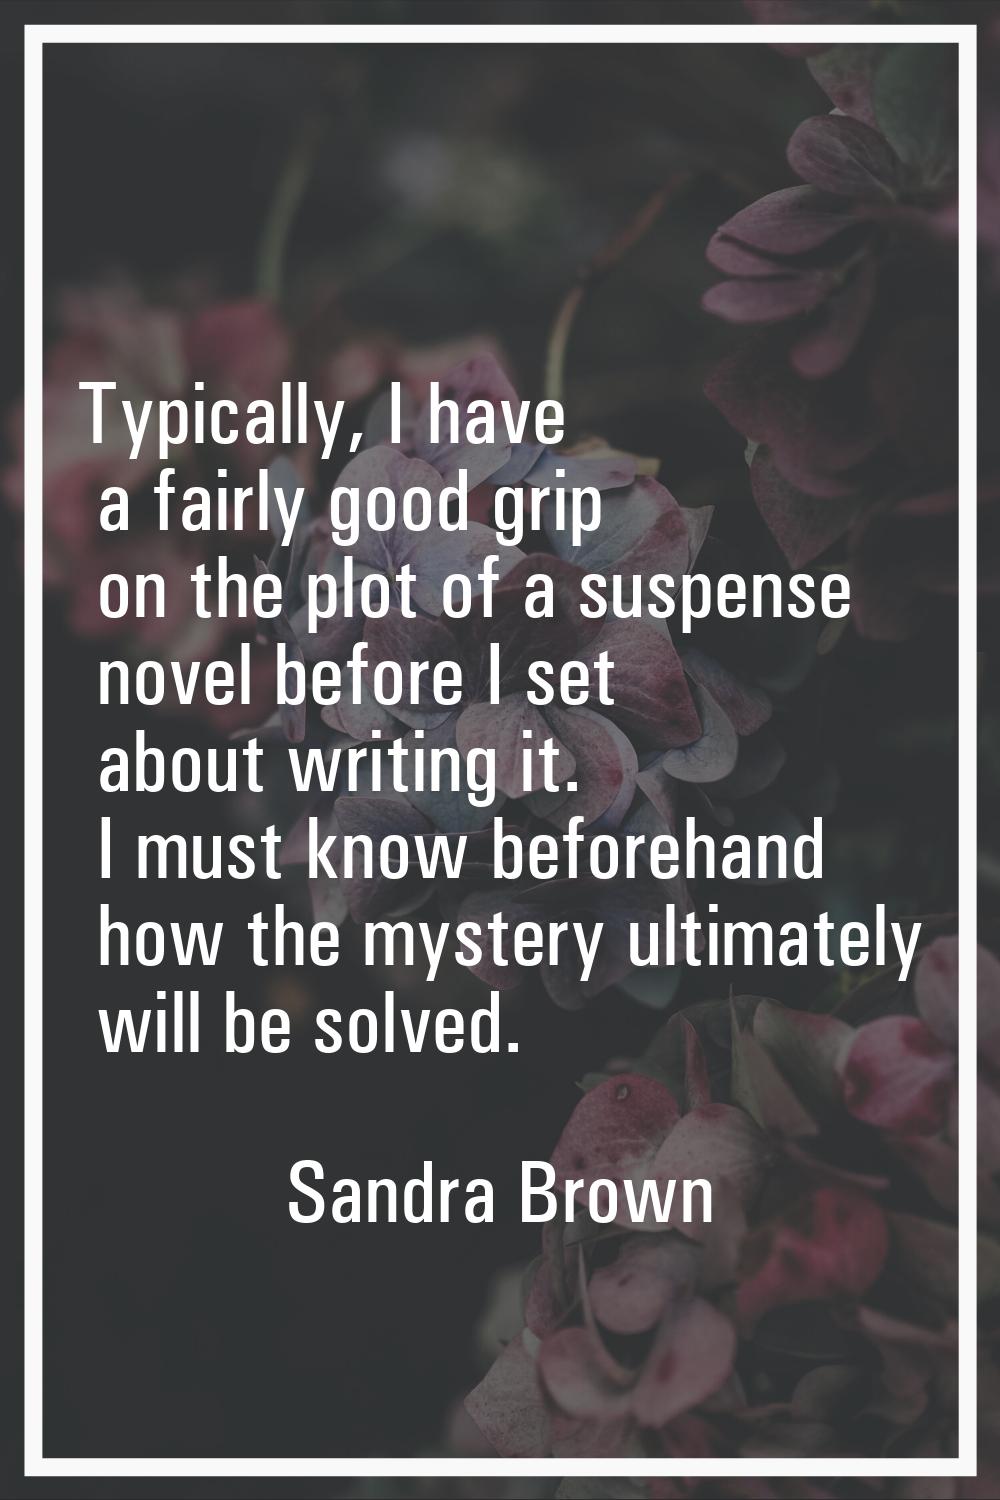 Typically, I have a fairly good grip on the plot of a suspense novel before I set about writing it.